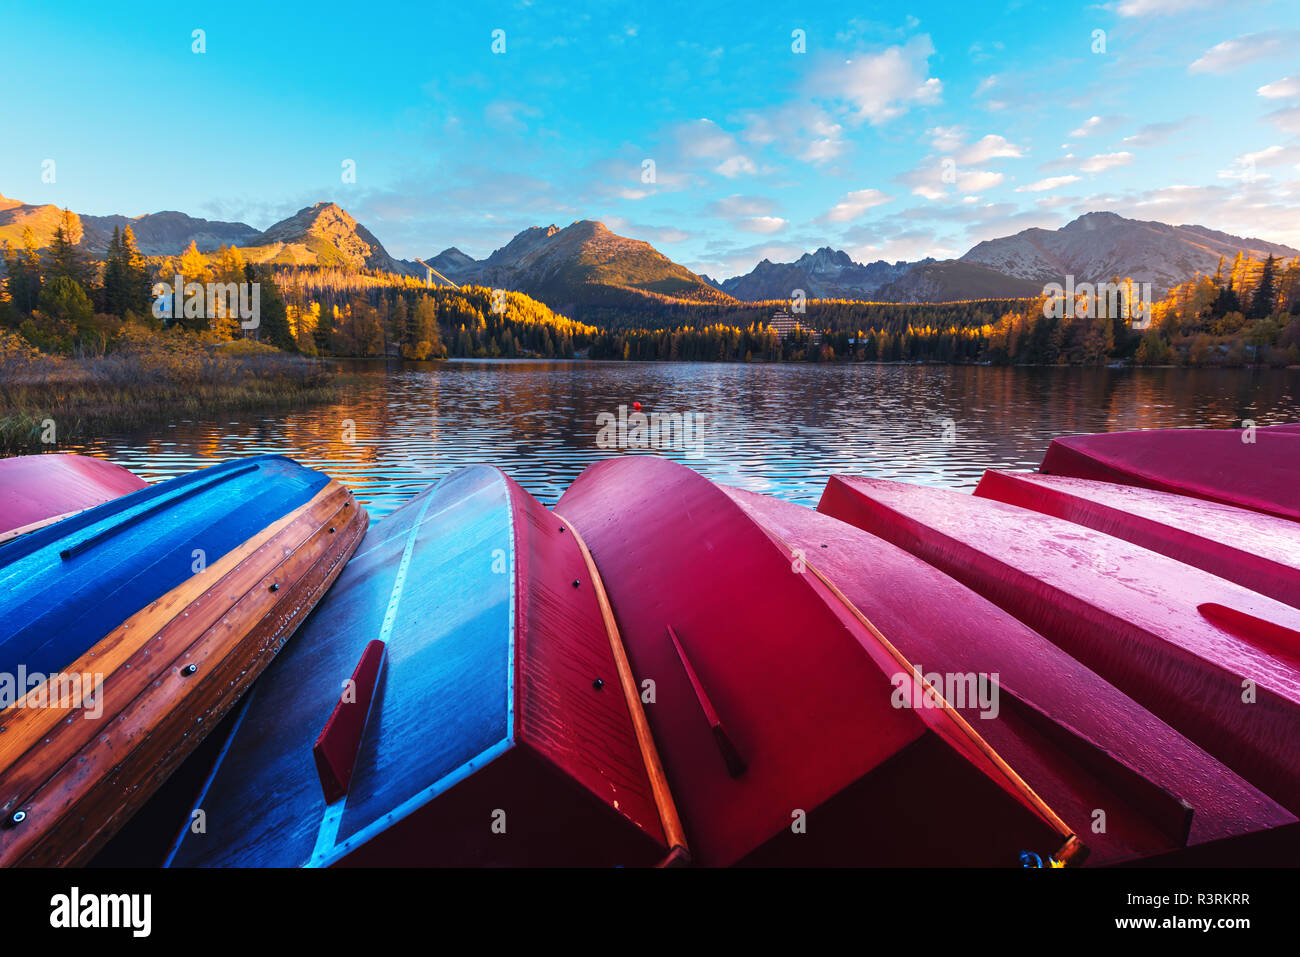 Picturesque autumn view of lake Strbske pleso in High Tatras National Park, Slovakia. Row of red wooden boats and high mountains on background. Stock Photo